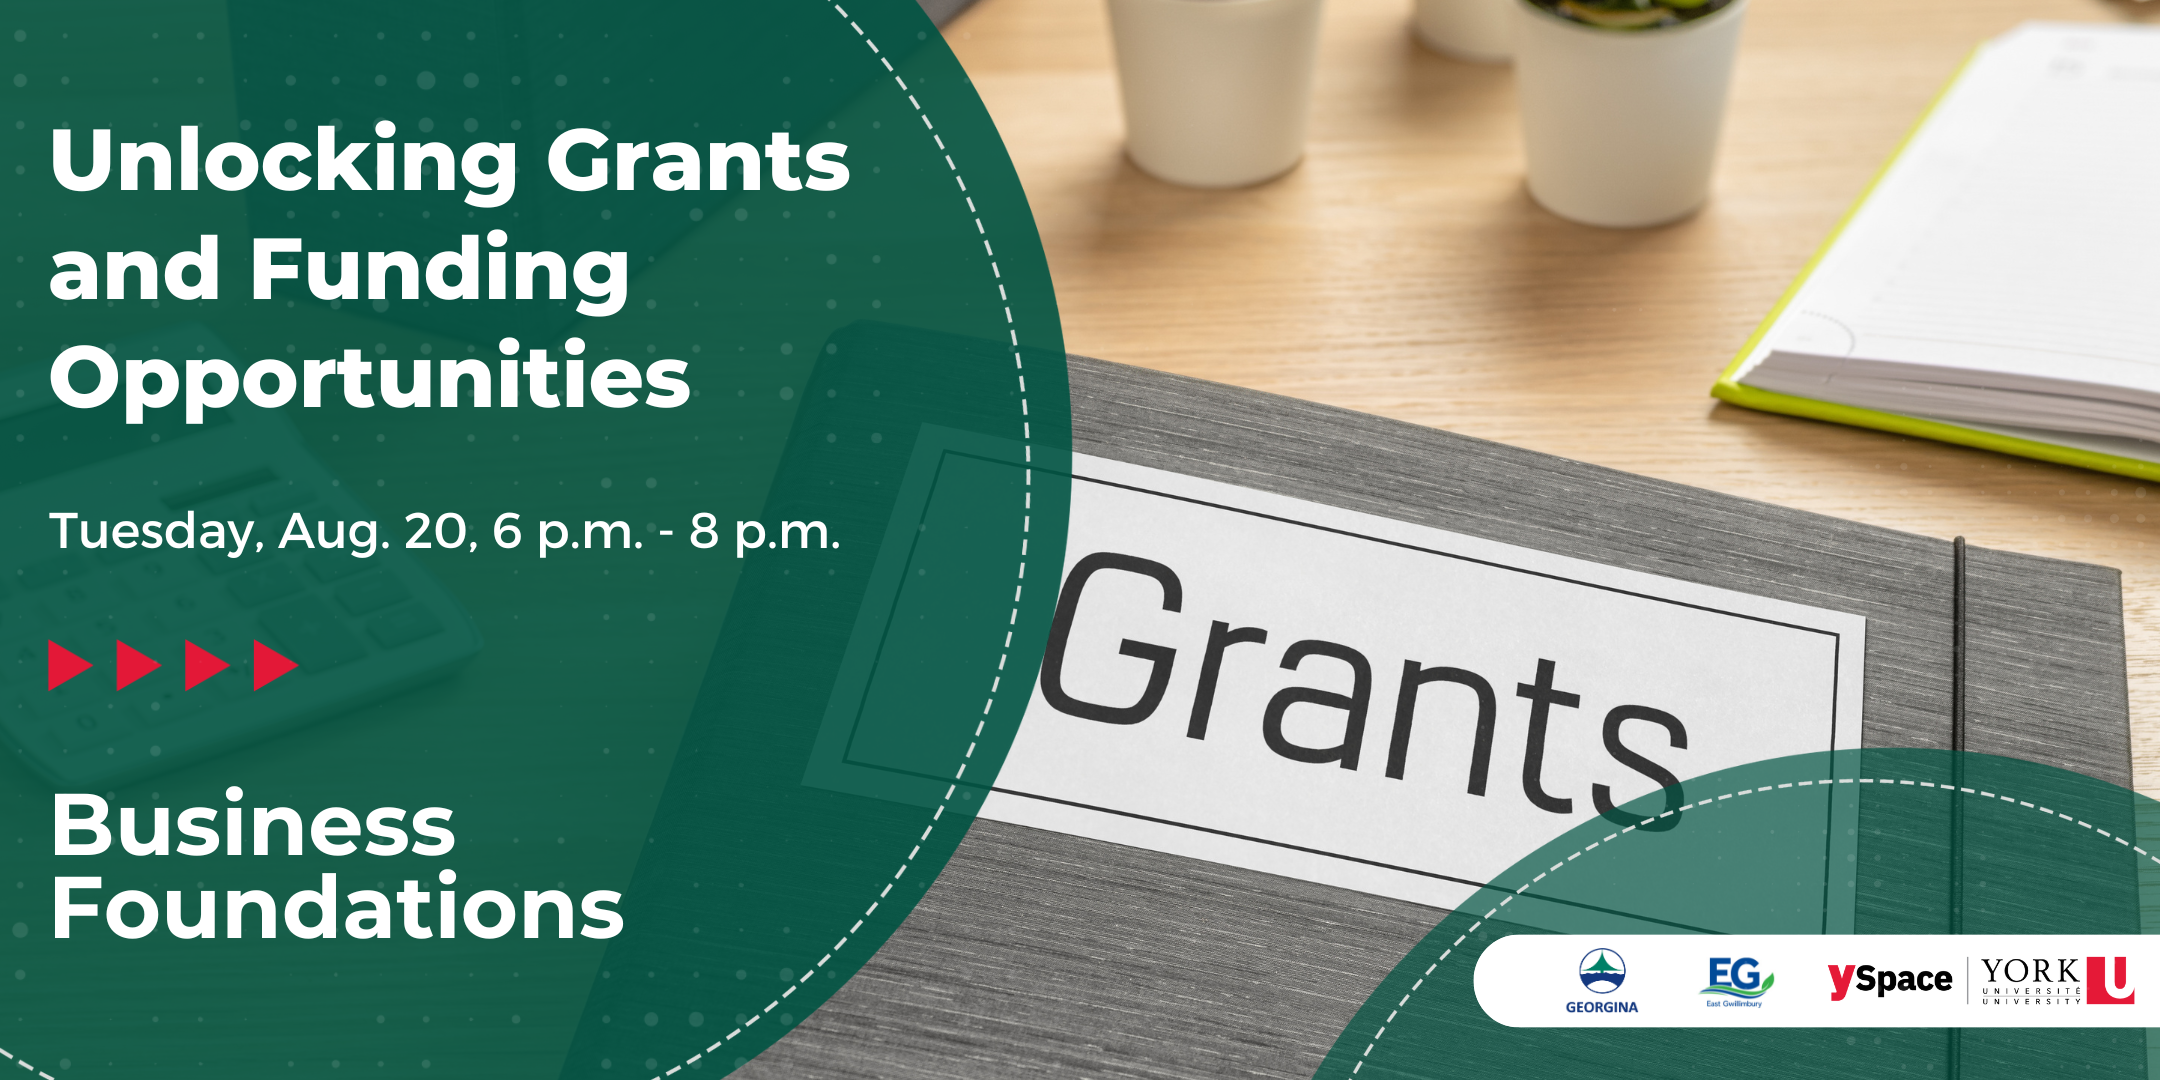 Notebook with word Grants on it. With the words Unlocking Grants and Funding Opportunities Tuesday Aug. 20 6 p.m. - 8 p.m. Business Foundations